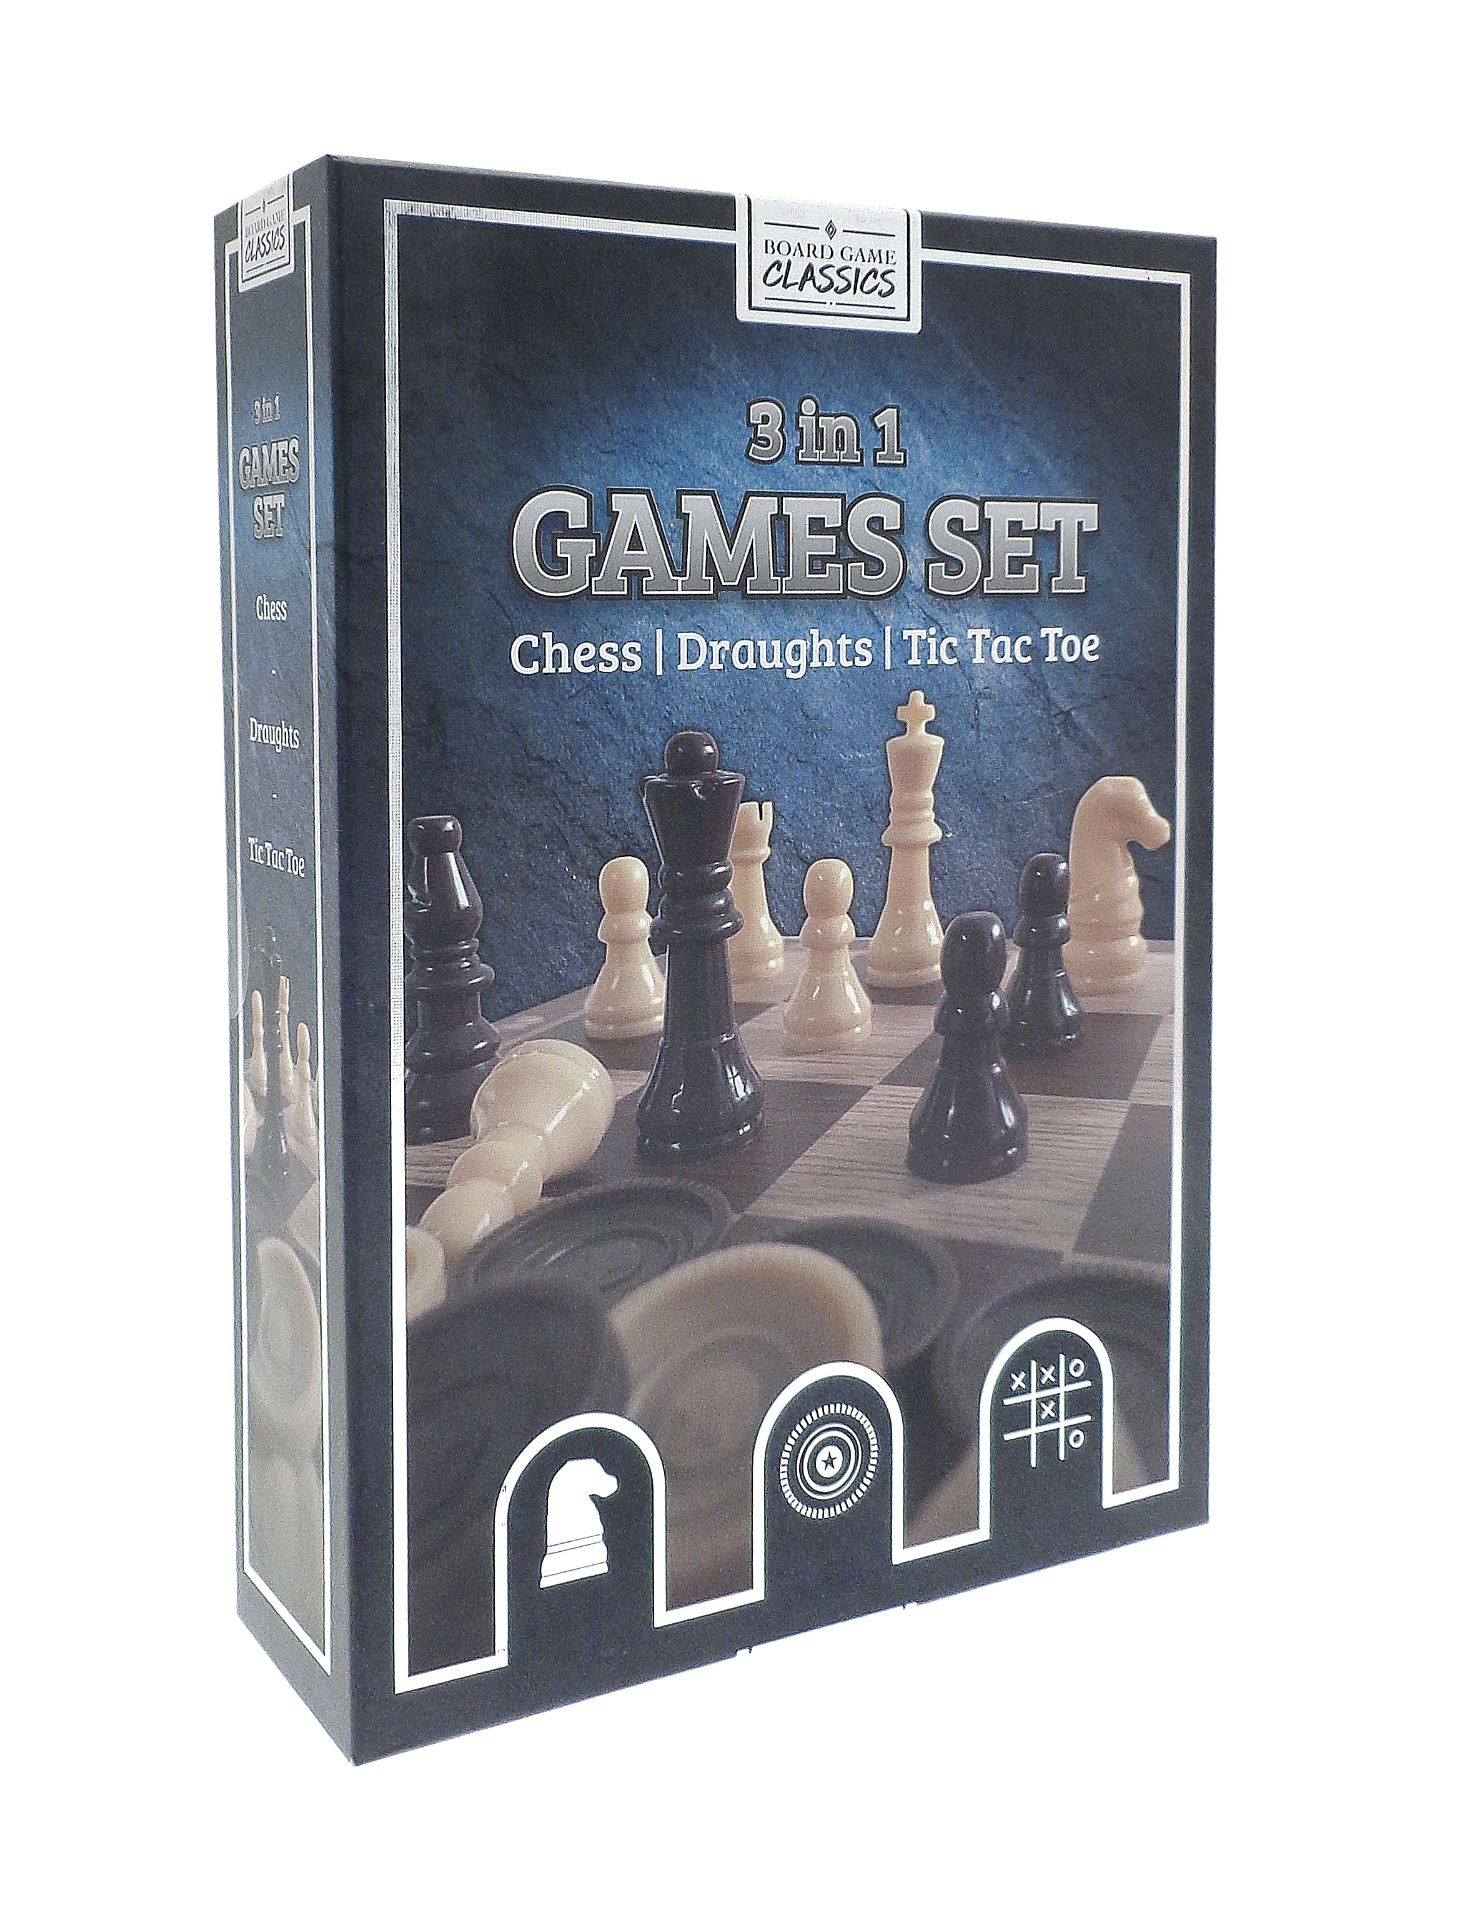 New 3 in 1 Games Set - Chess, Draughts, Tic Tac Toe - Image 2 of 3